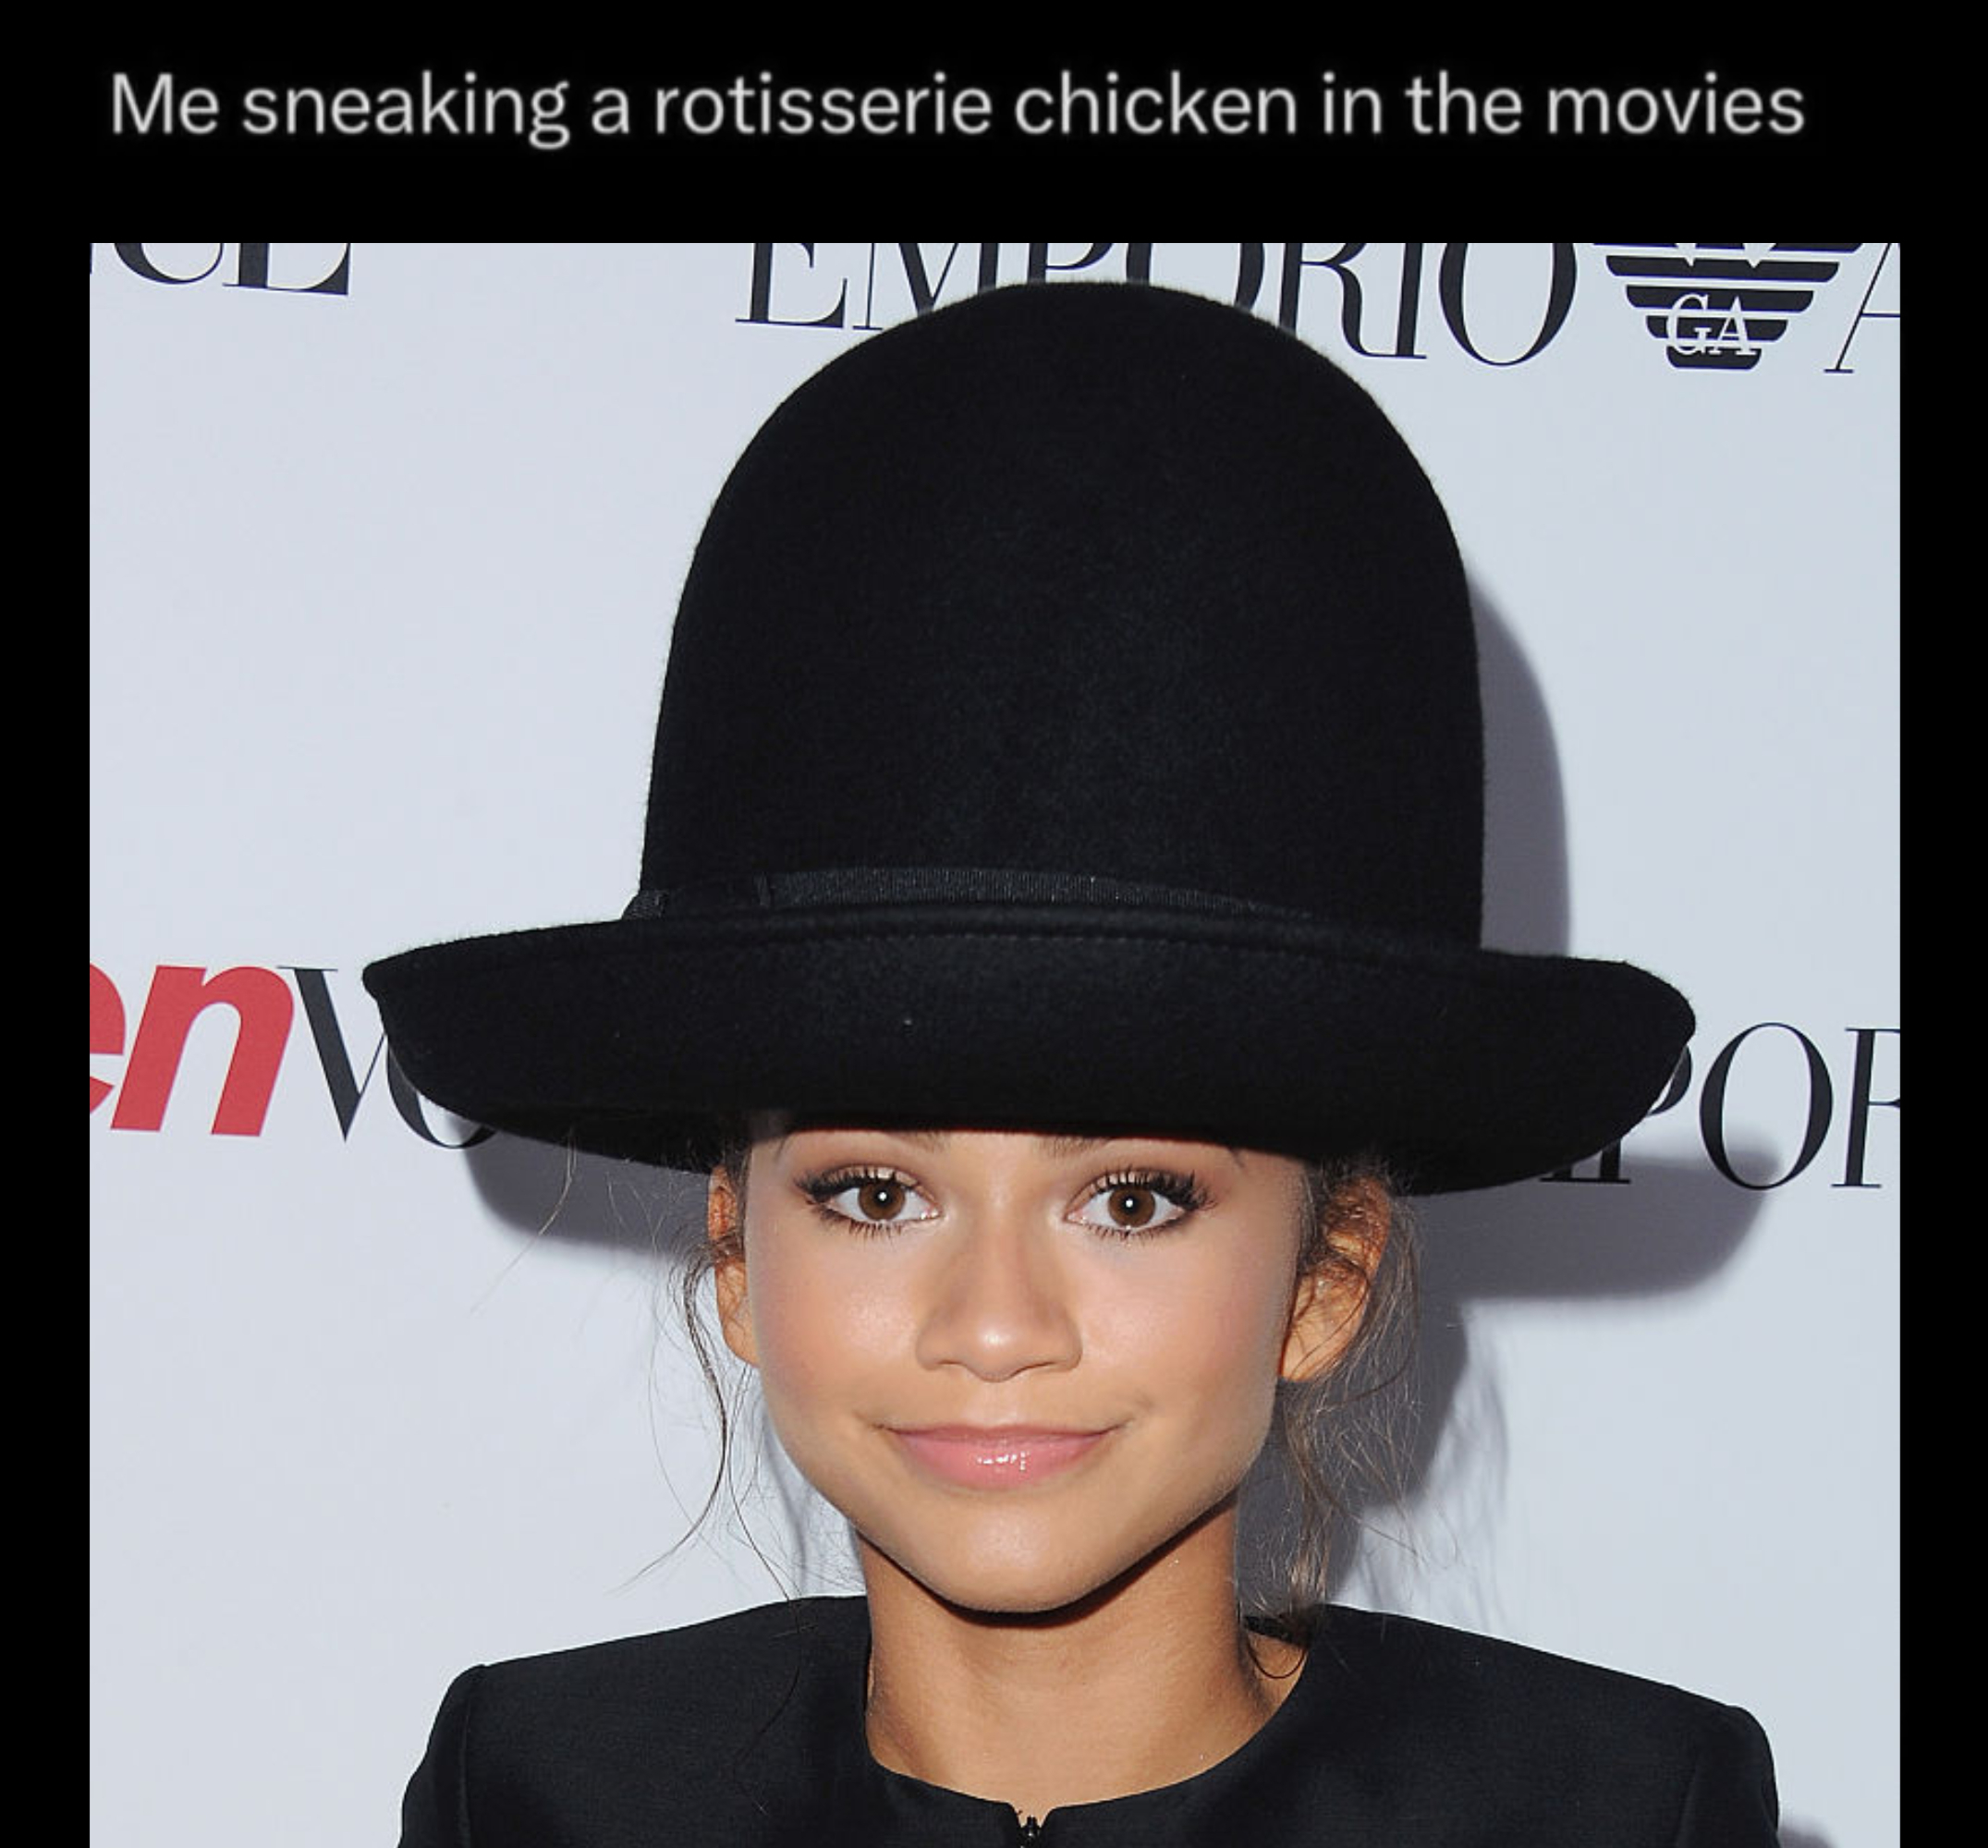 Person wearing an oversized hat with humorous reference to hiding an item under it